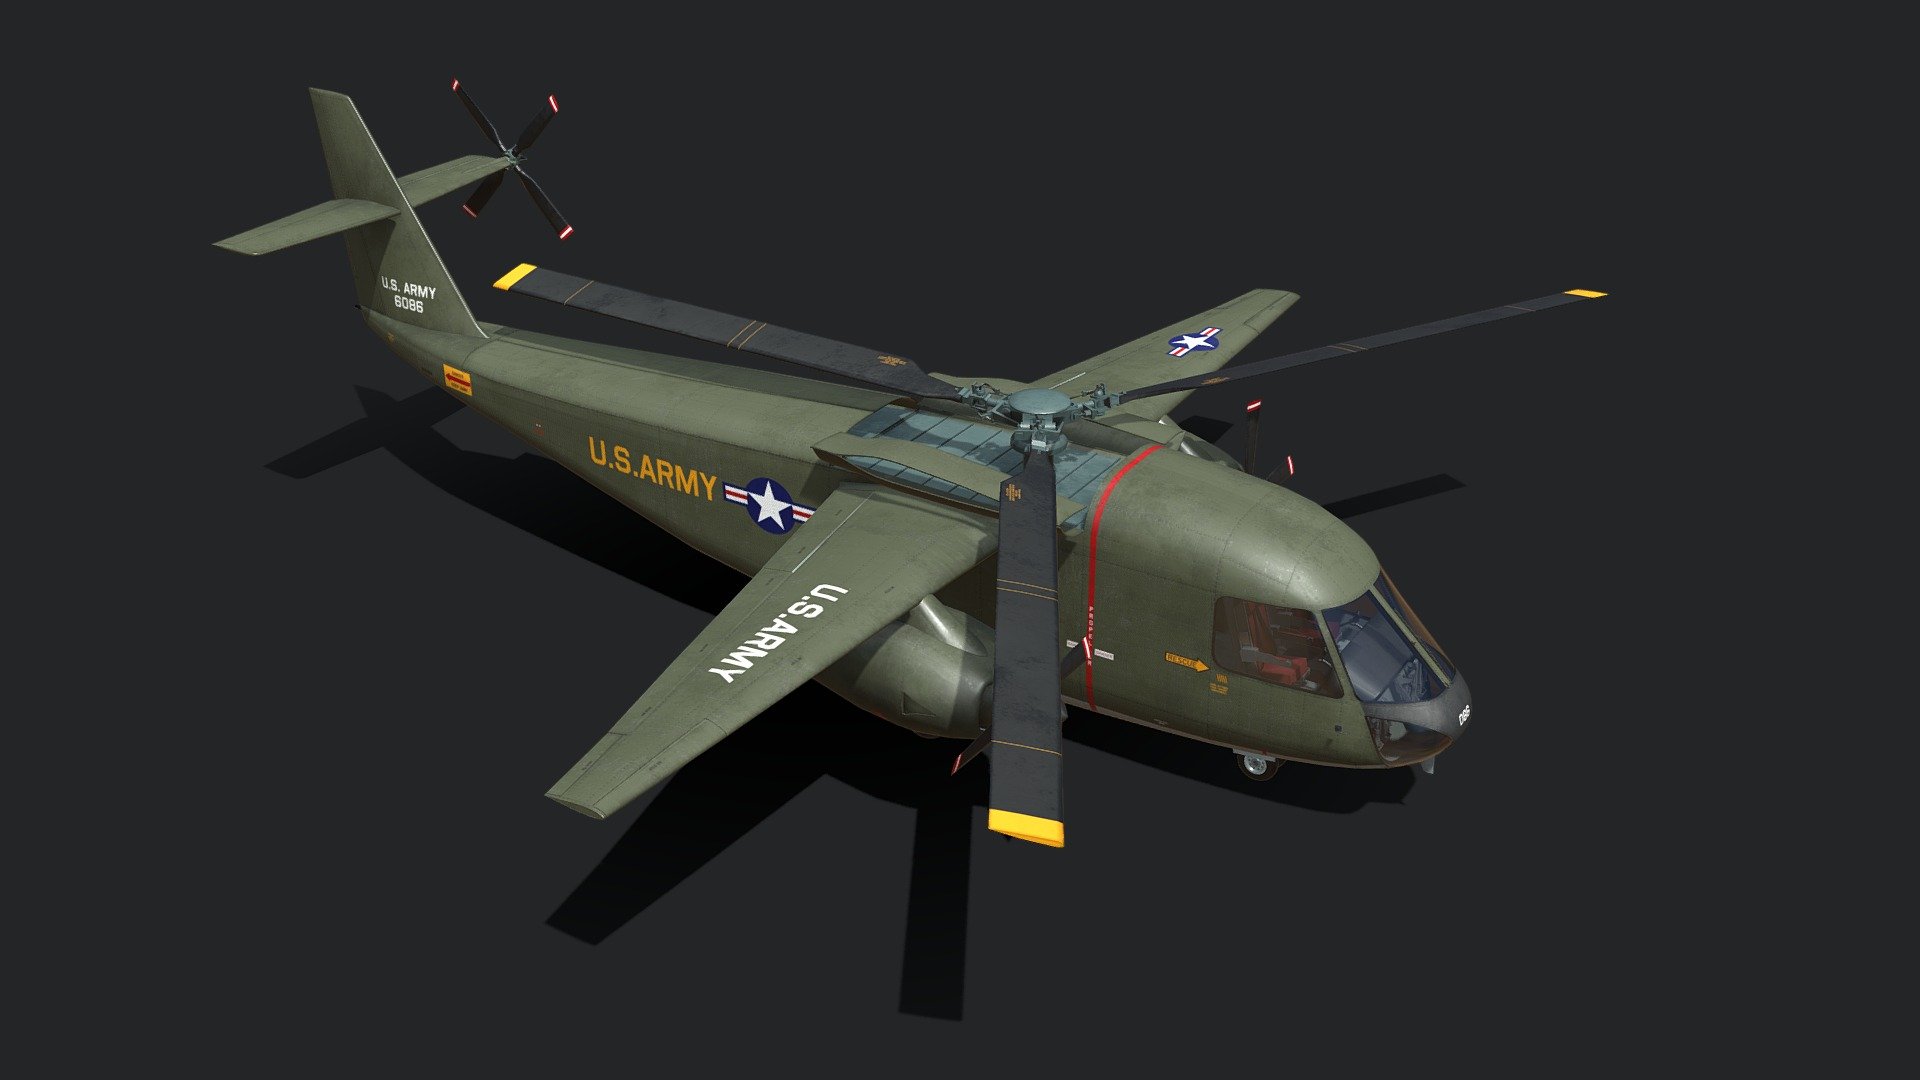 In the mid-60’s, VTOL in all its forms was all the rage. In 1965, Lockheed answered a US Army Request For Proposals with the CL-945 concept, a stowed-rotor helicopter design. At low speeds and hover, it would operate as a helicopter; at higher speeds, aircraft-style propulsion systems would power it forward; and at much higher speeds than helicopters normally attain, the rotors would stop rotating and would fold back and be stowed for minimum drag. It was a great idea that had the little problem of being horribly complex, heavy and expensive 3d model